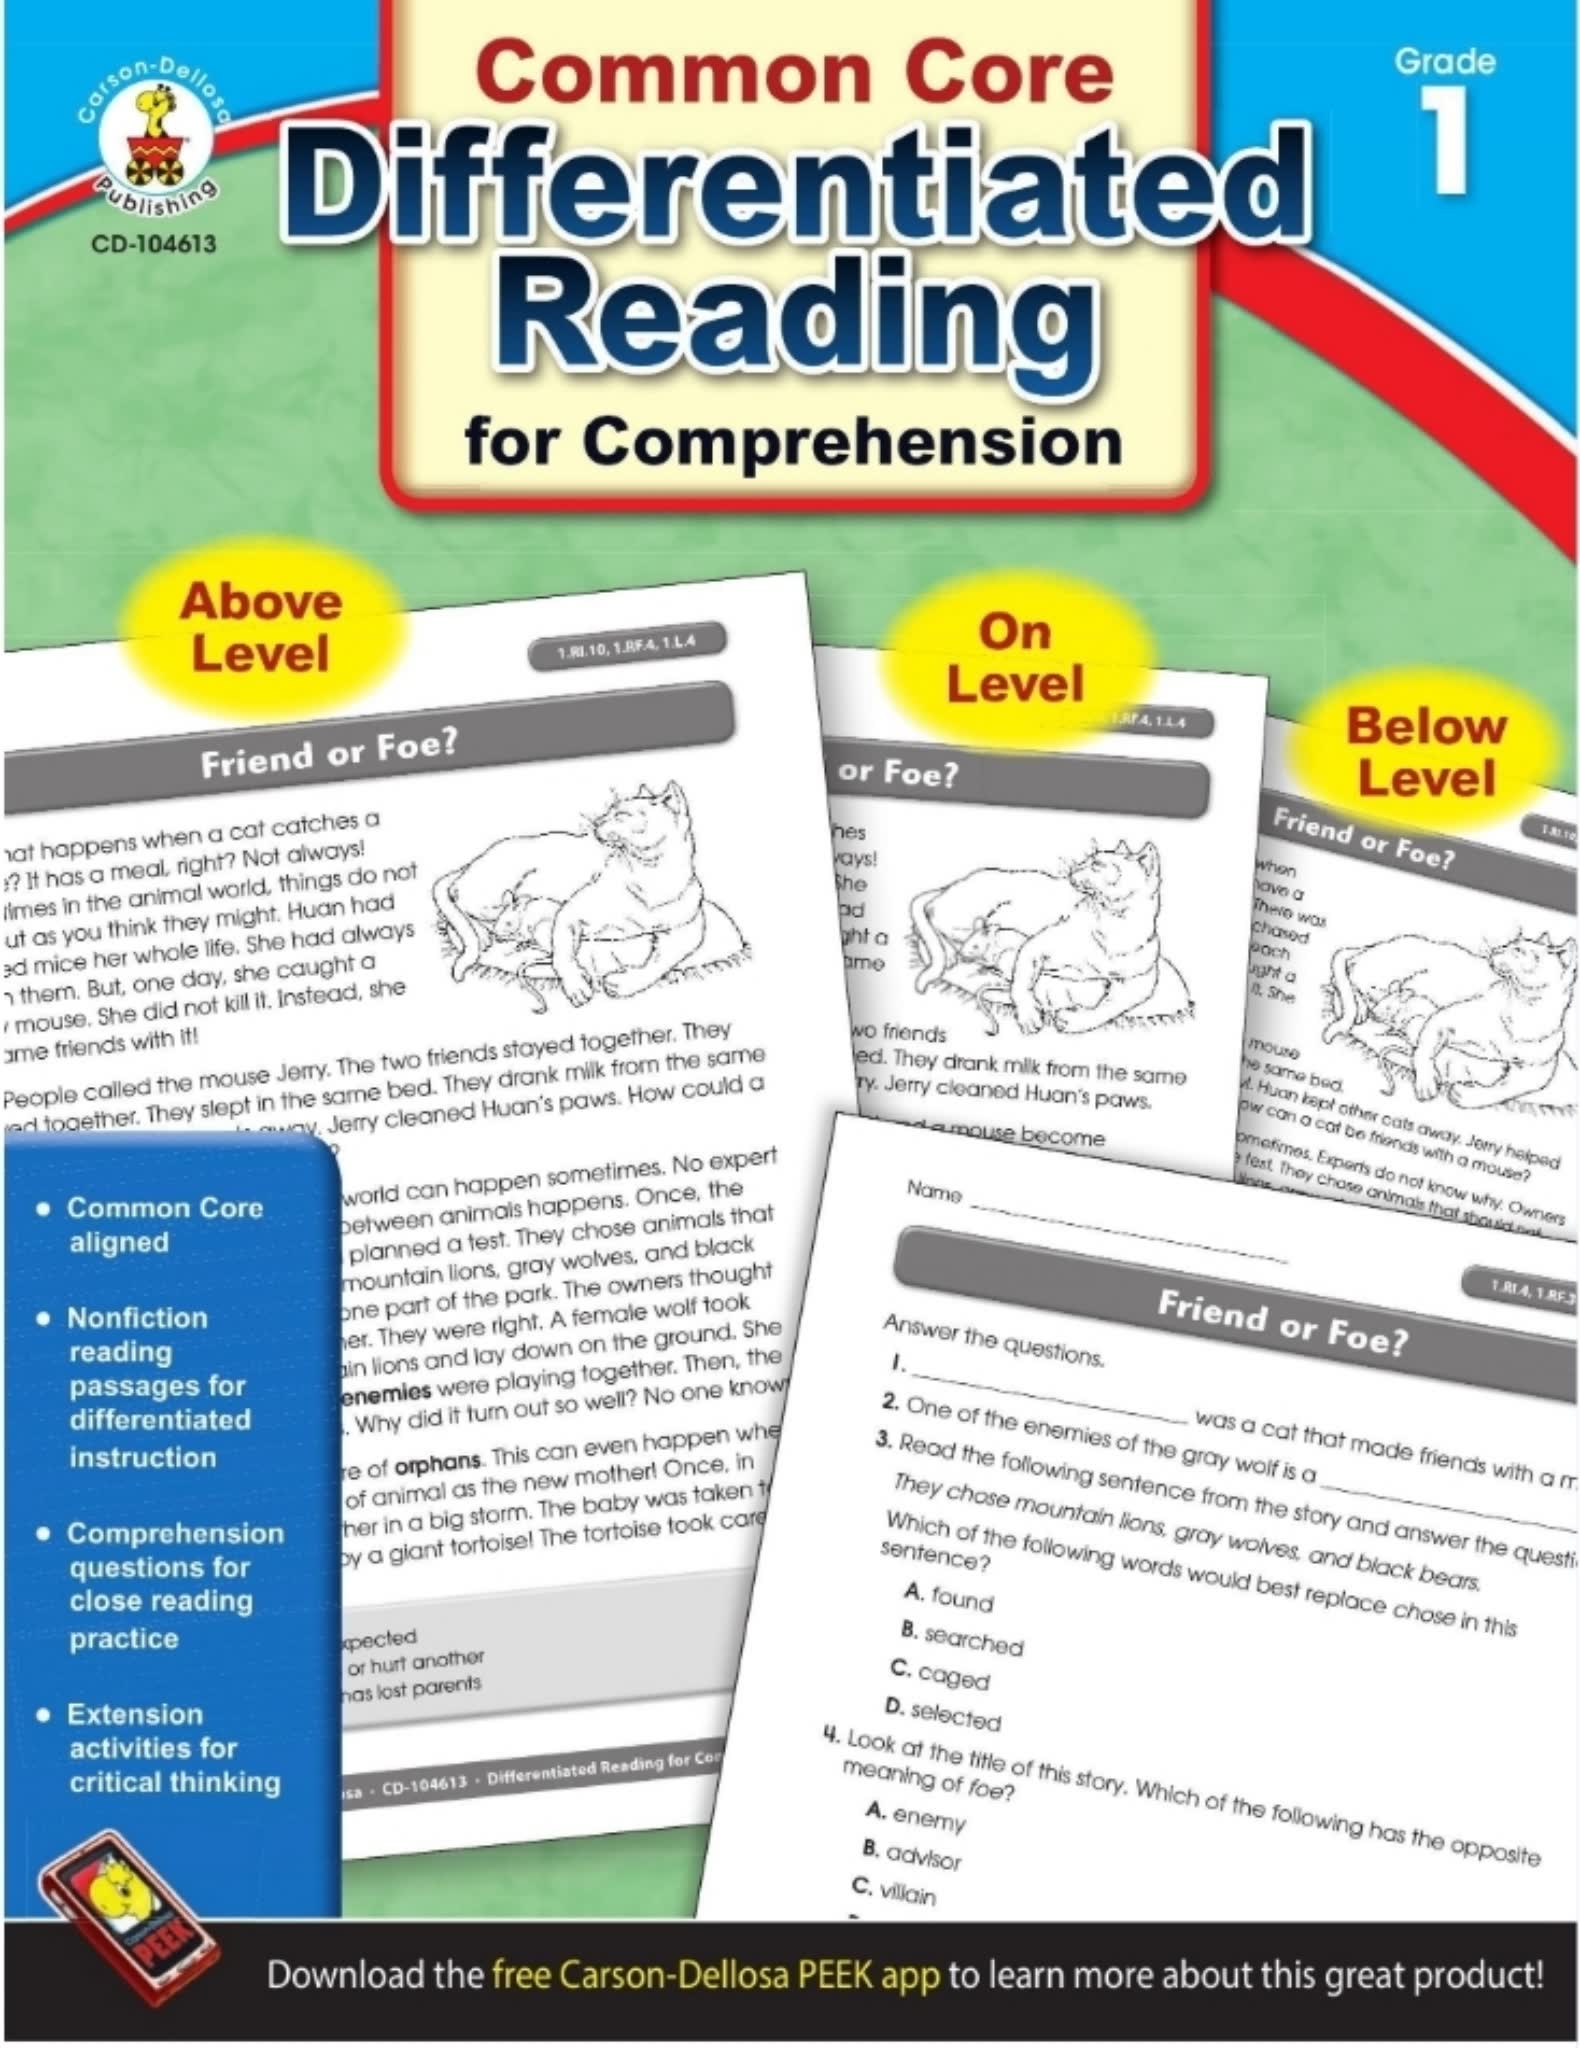 Differentiated-Reading-for-Comprehension